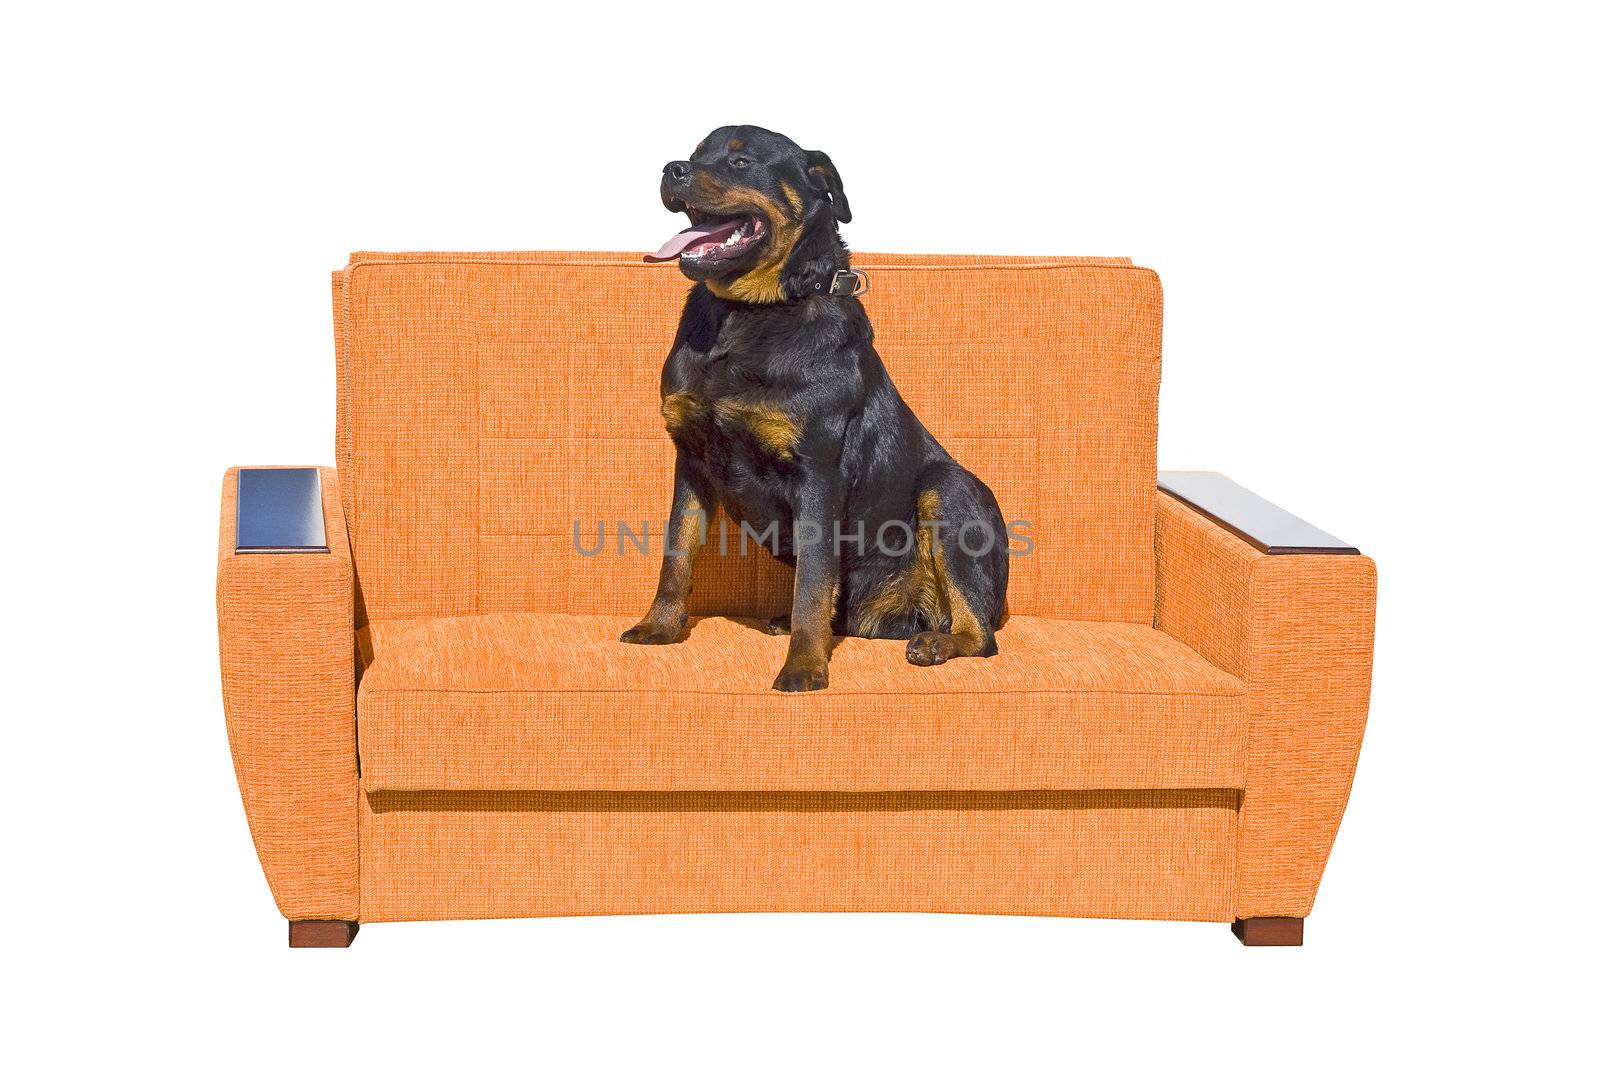 Black dog seating on the sofa. Isolated on a white background